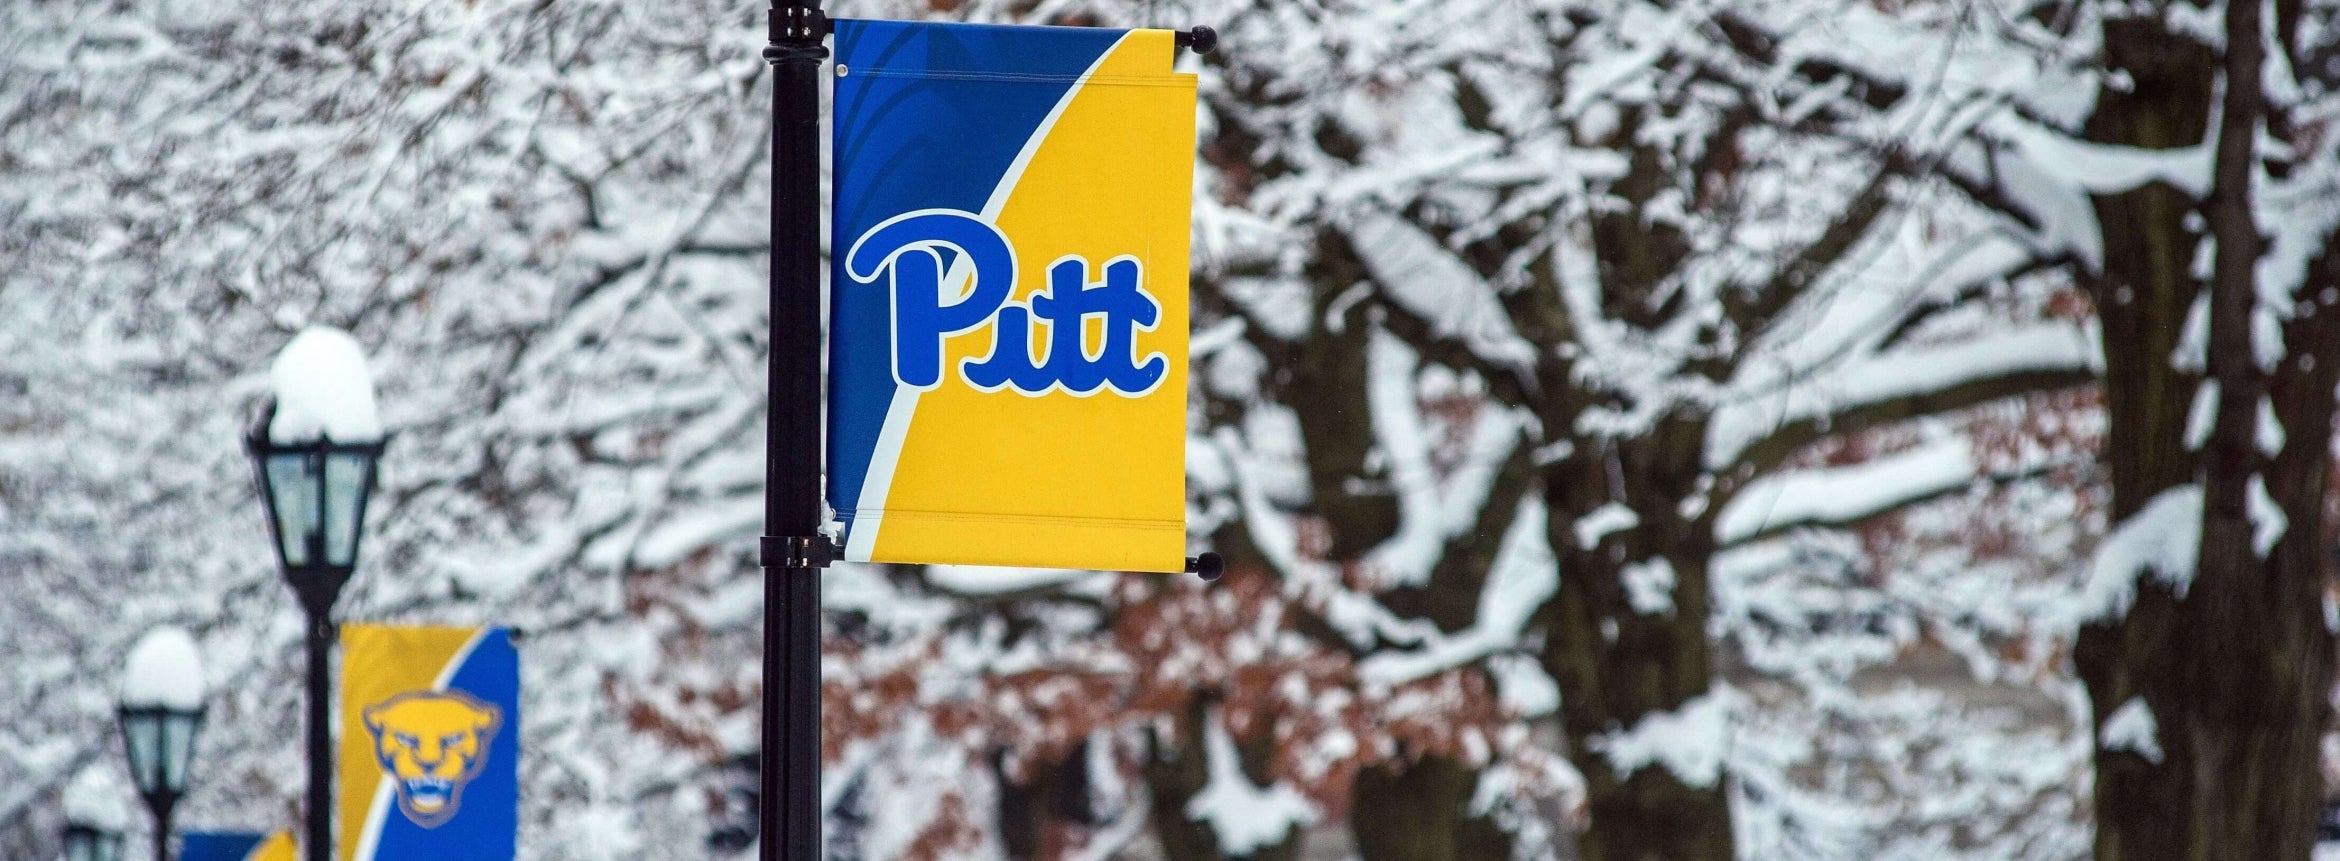 Pitt banners on light posts by trees covered in snow